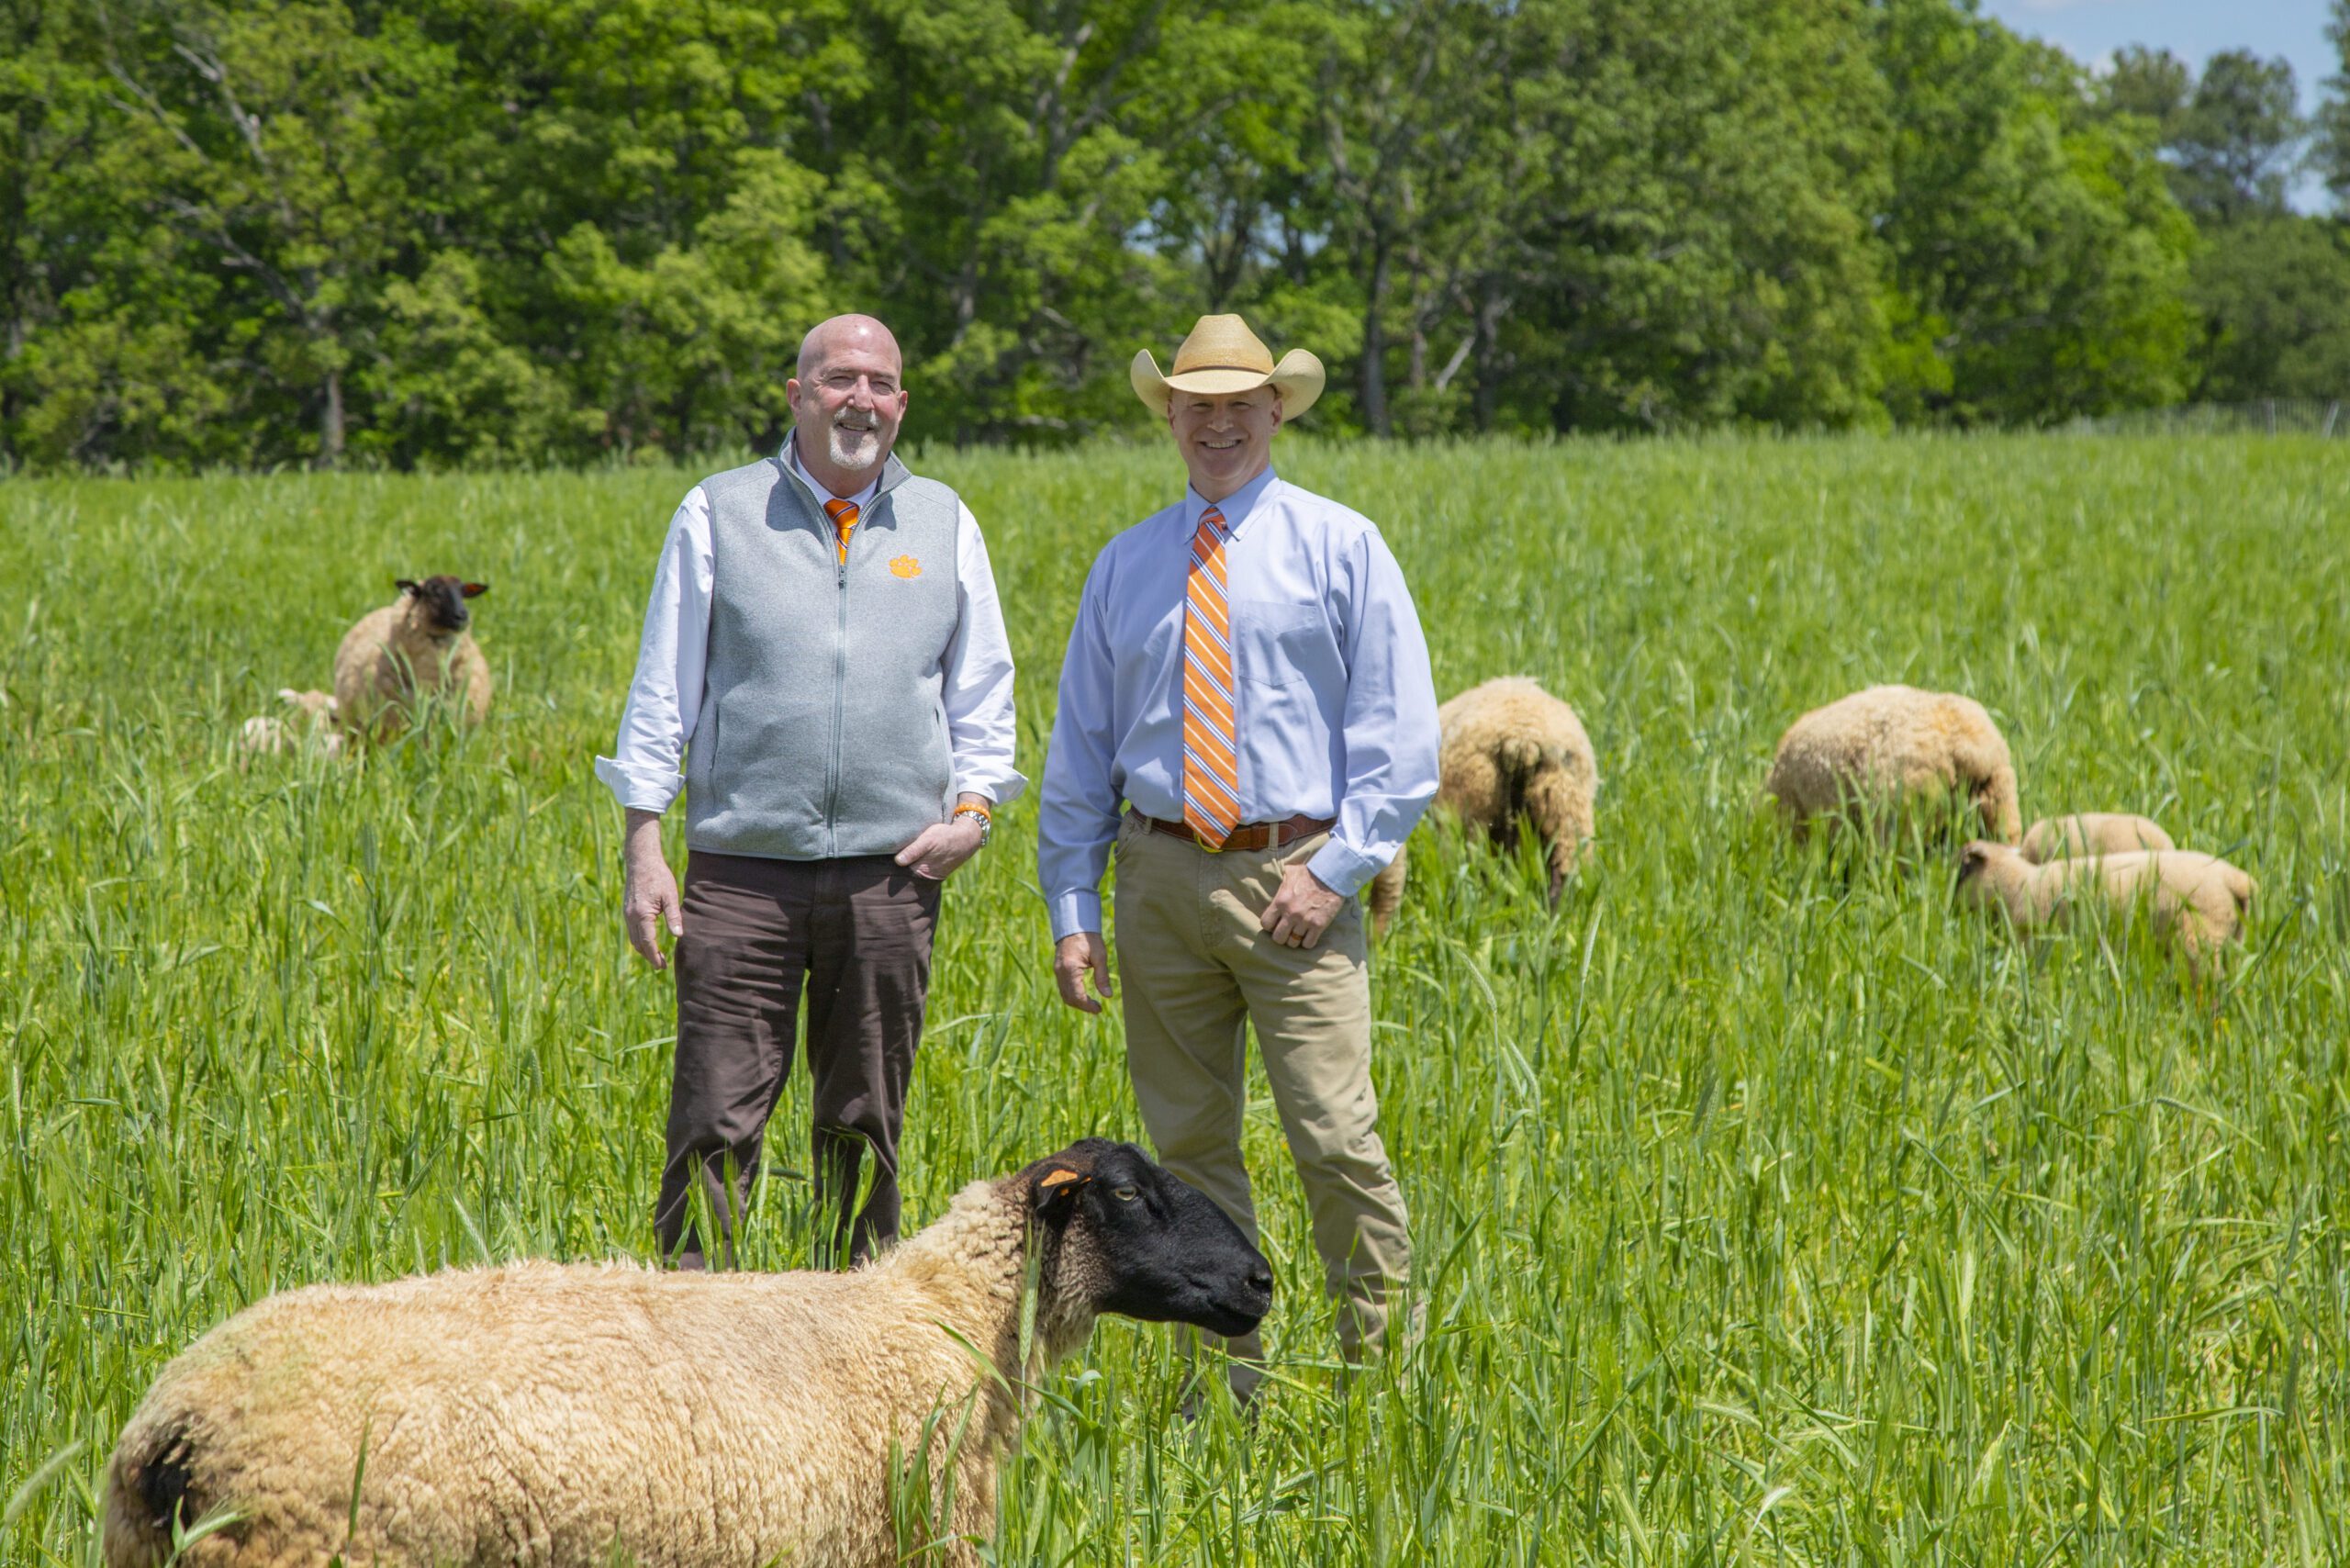 Dean Marks and Matt Hersom pose in a field of sheep.